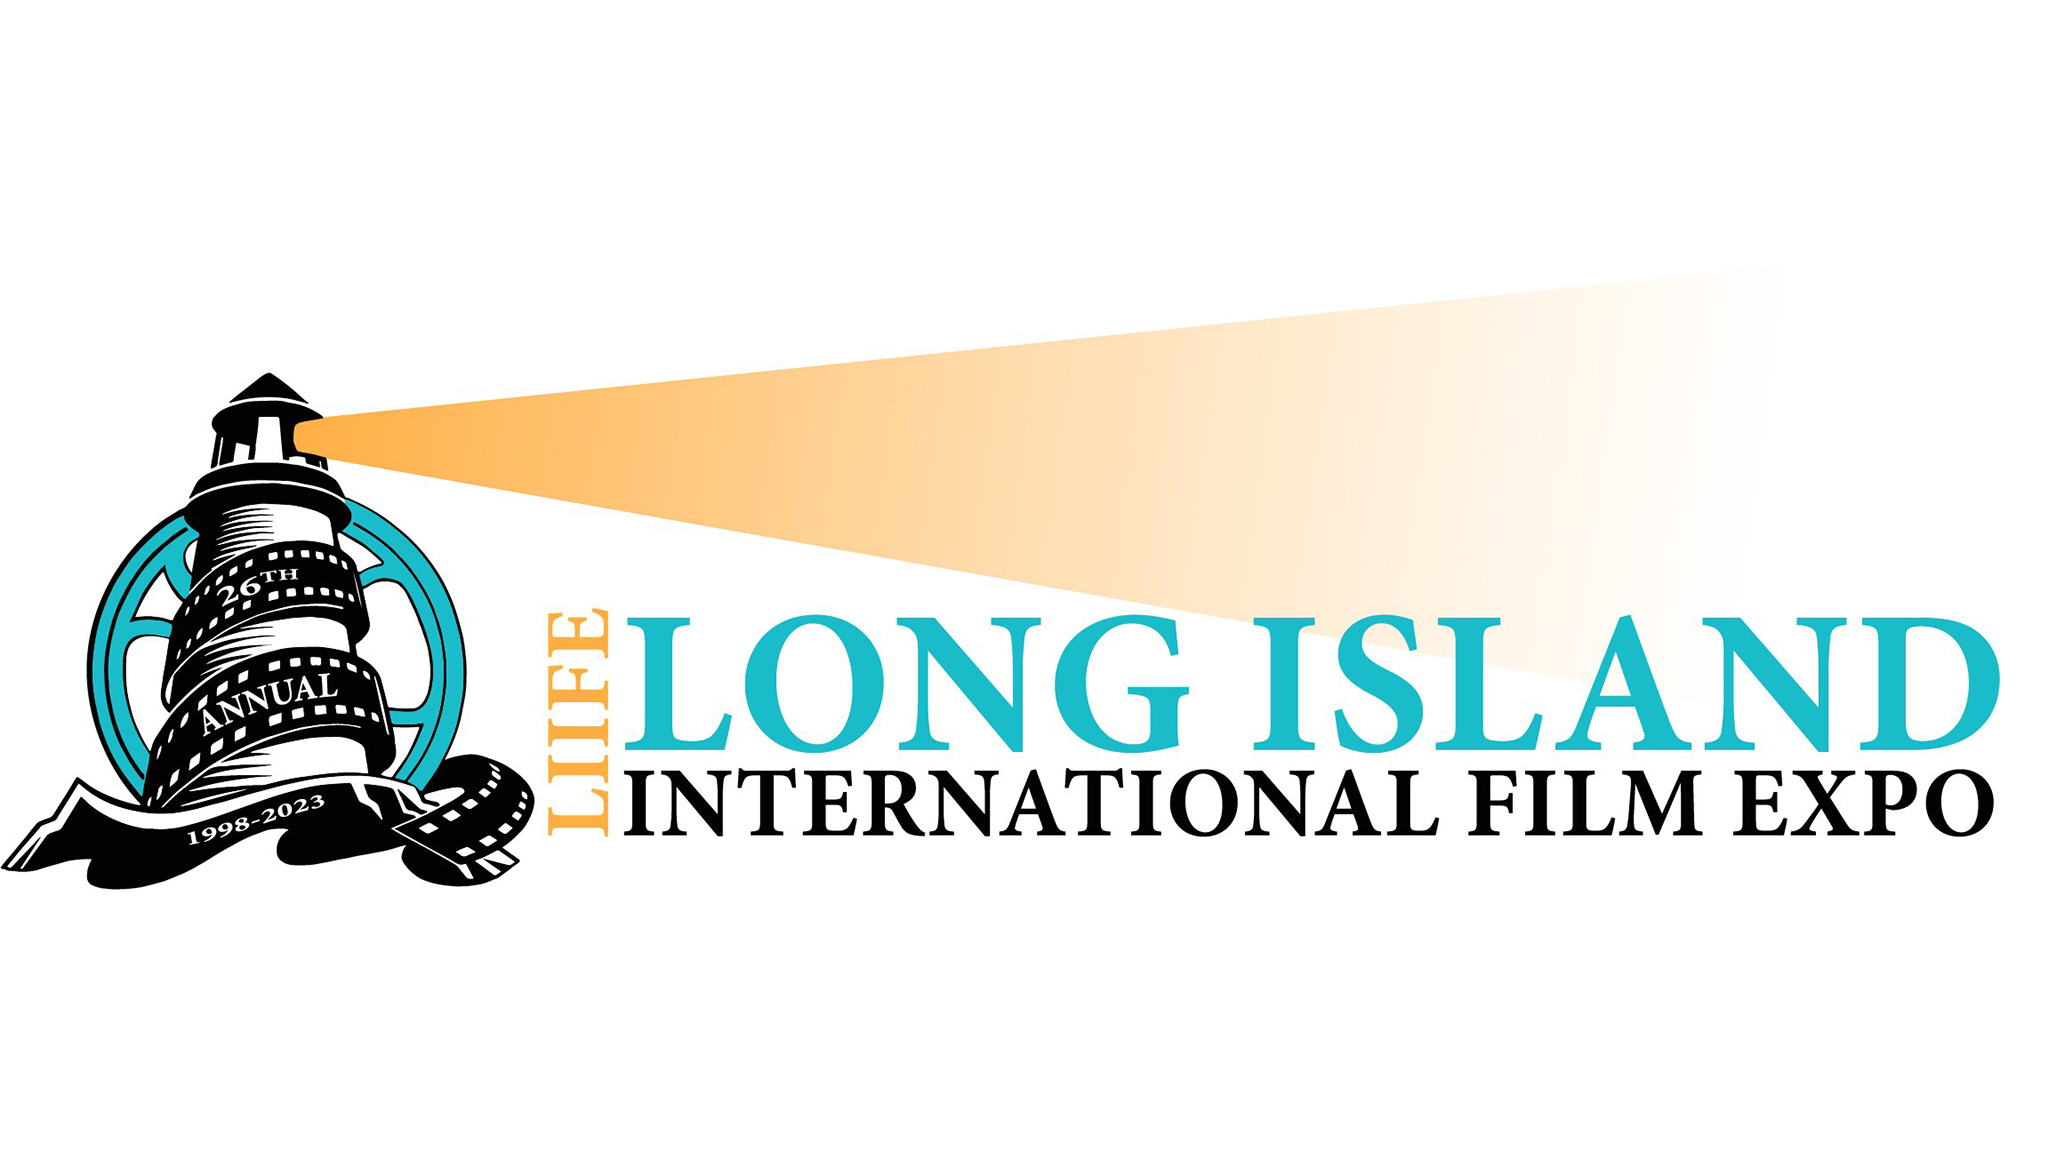 Discounted Pre-sale Gold Passes Now Available for the 26th Annual Long Island International Film Expo July 19-23, 2023